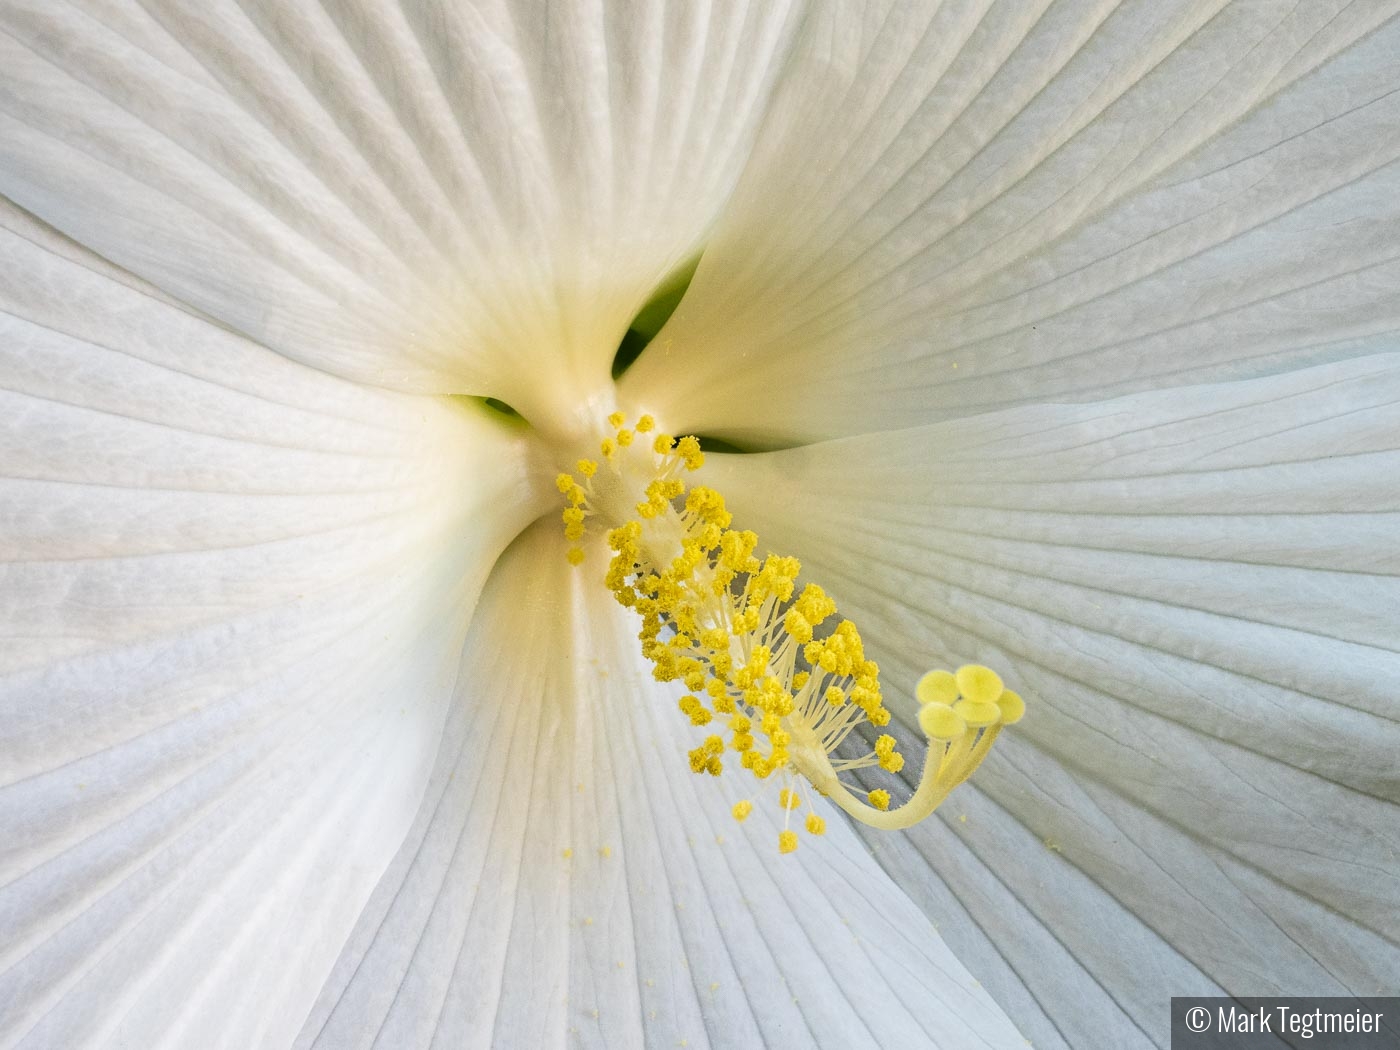 Hibiscus--Up Close and Personal by Mark Tegtmeier